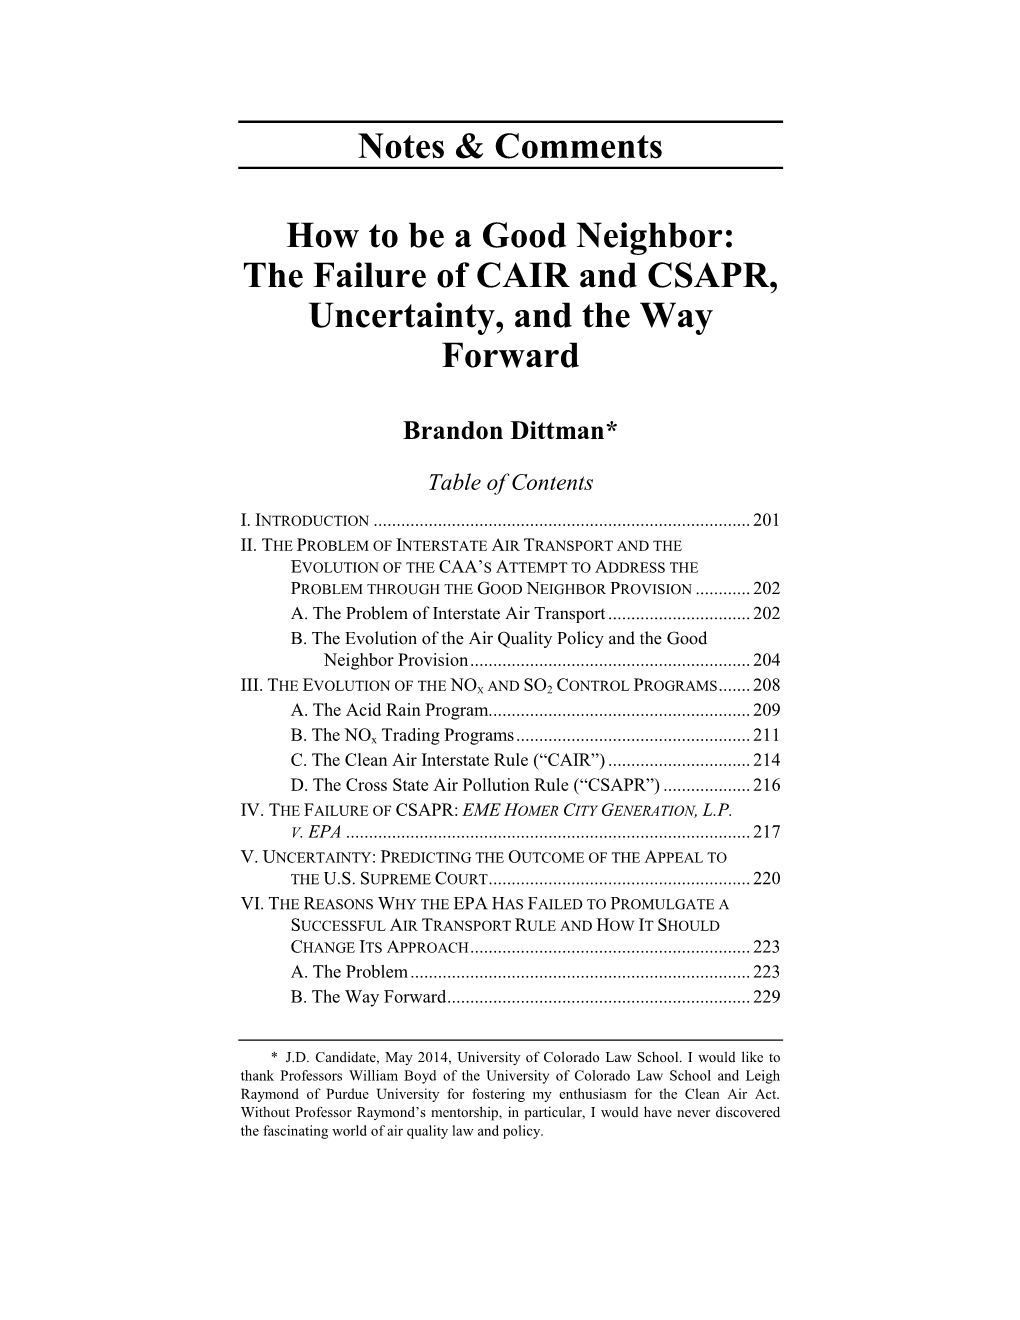 Notes & Comments How to Be a Good Neighbor: the Failure of CAIR and CSAPR, Uncertainty, and the Way Forward